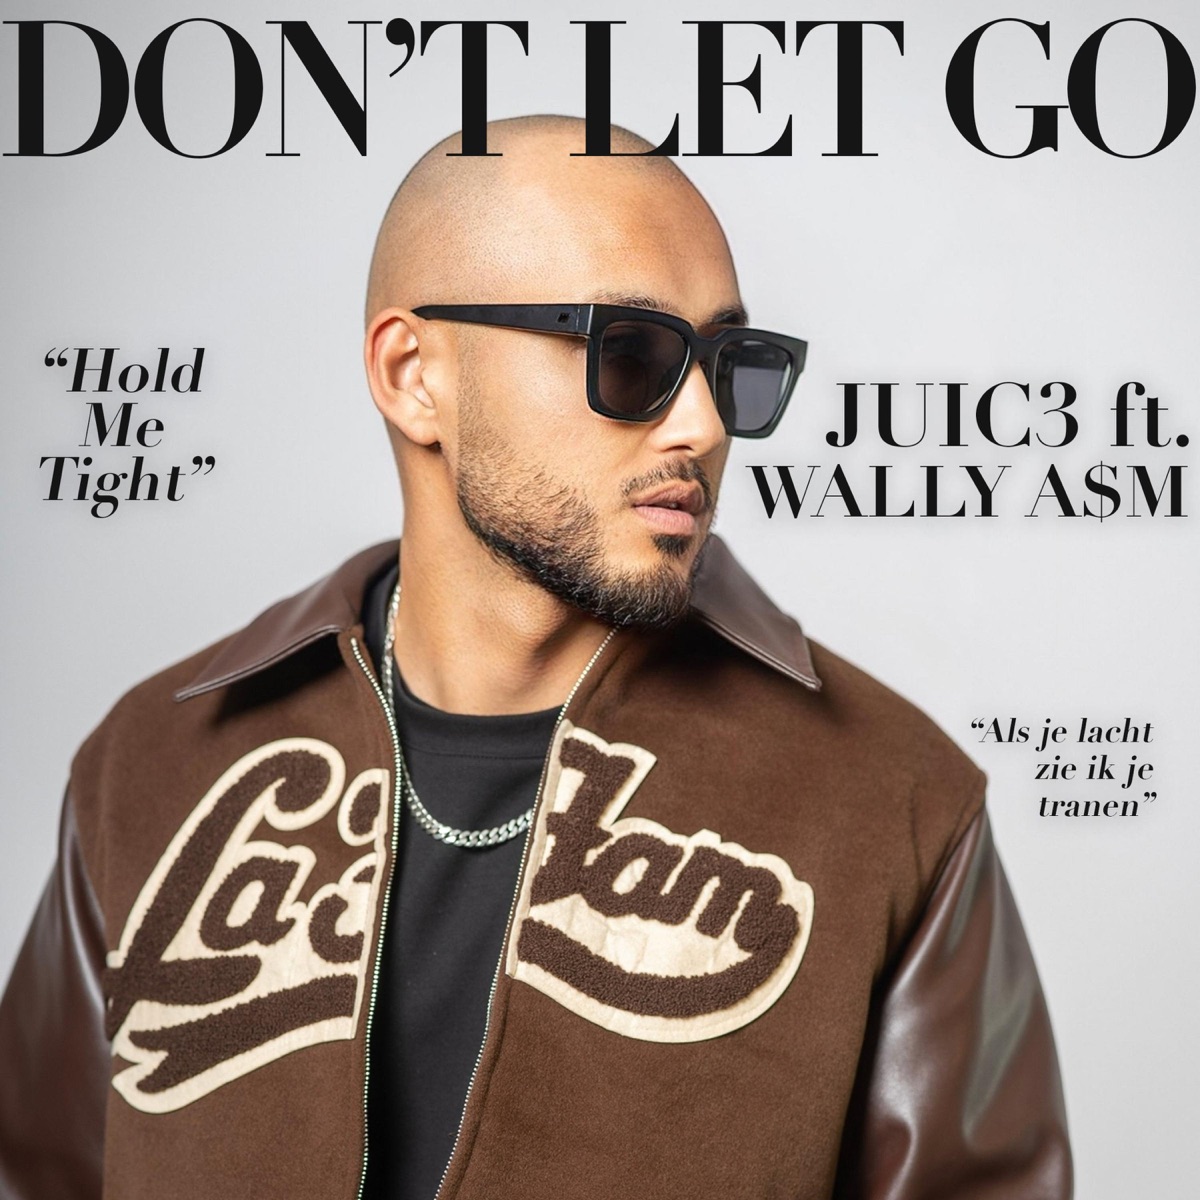 Juic3 - Don't Let Go (feat. Wally A$M) - Single